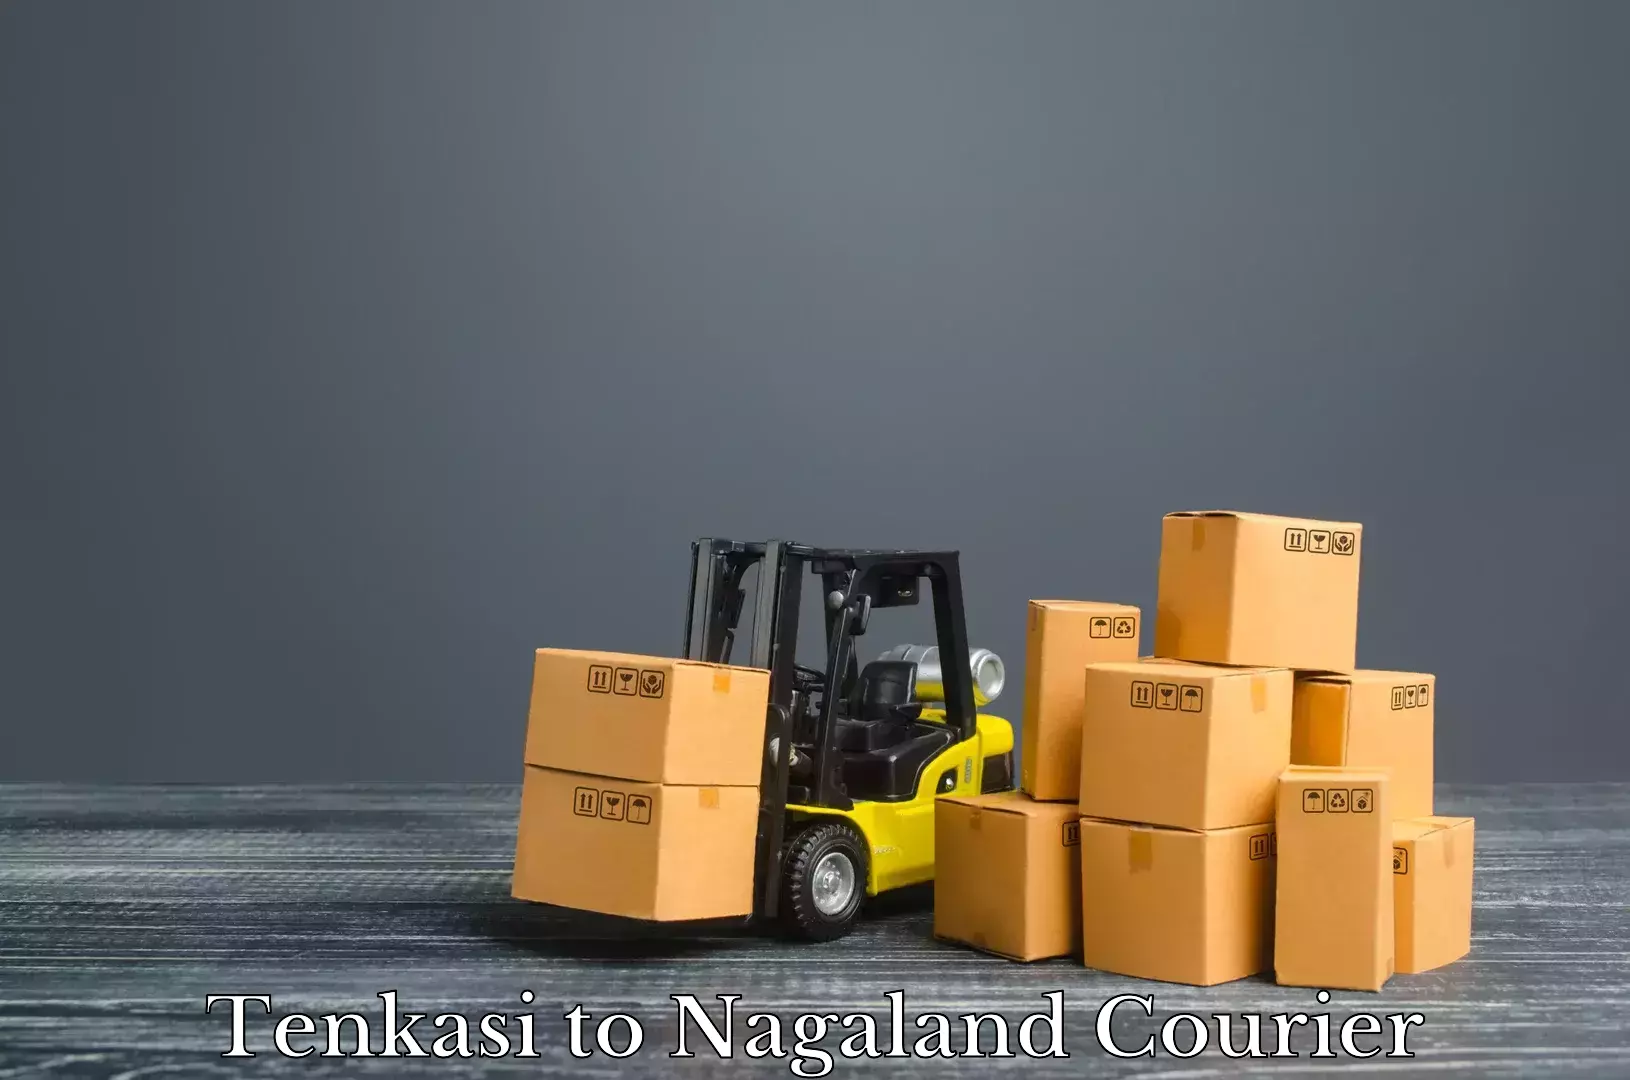 Luggage delivery system Tenkasi to Nagaland